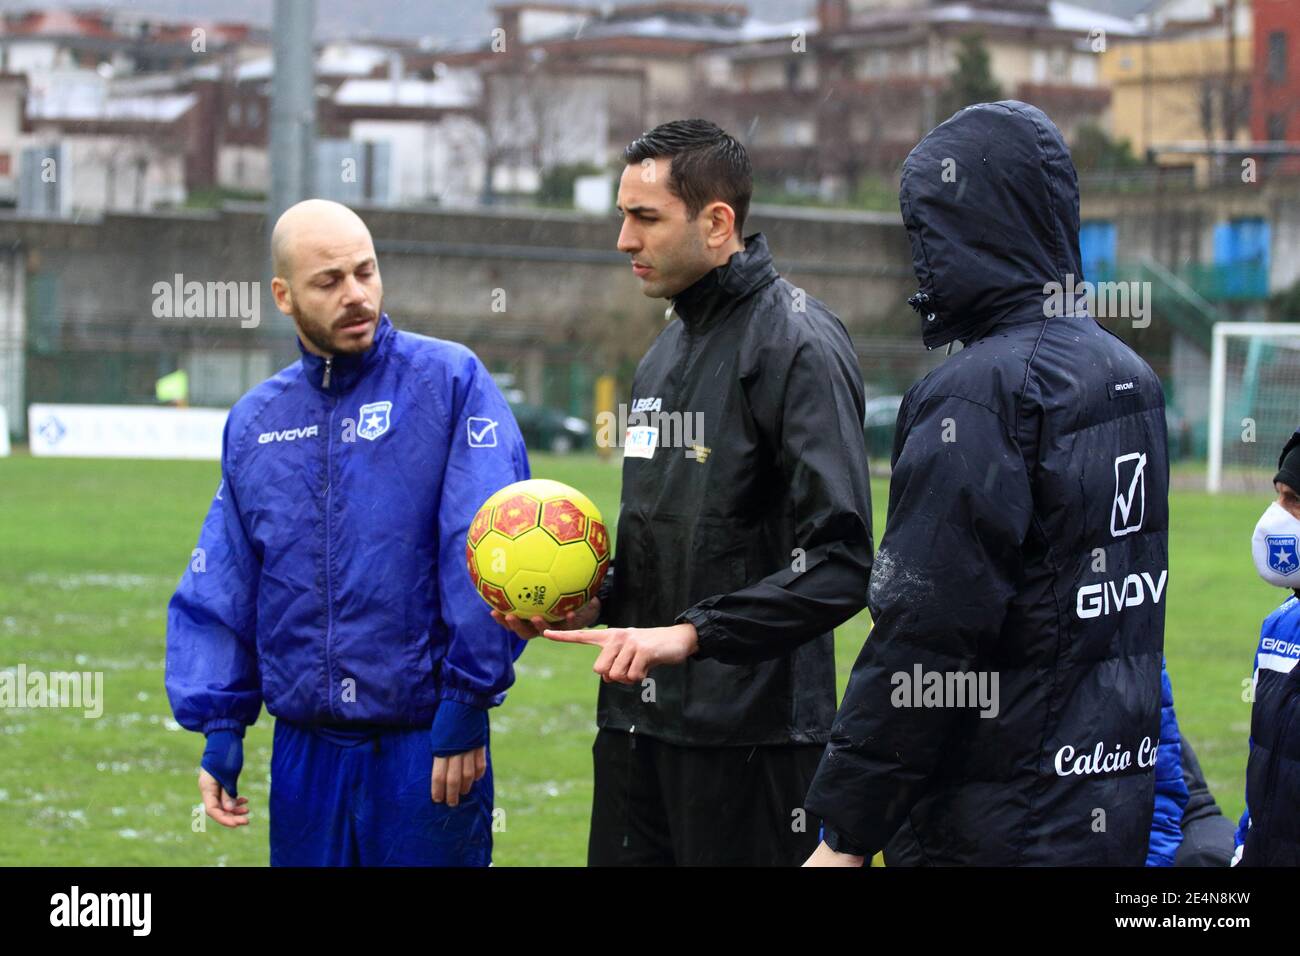 Pagani, Italy. 24th Jan, 2021. Serie C Italian Championship, Girone C Pro League football match between Paganese and Catania, 20th day of the championship. At the third inspection, the referee Andrea Colombo of Como has taken the decision to postpone the match of Pagani to a date to be set, considering impracticable conditions of the playing field, hit by an abundant rain in the last hours. (Photo by Pasquale Senatore/Pacific Press/Sipa USA) Credit: Sipa USA/Alamy Live News Stock Photo